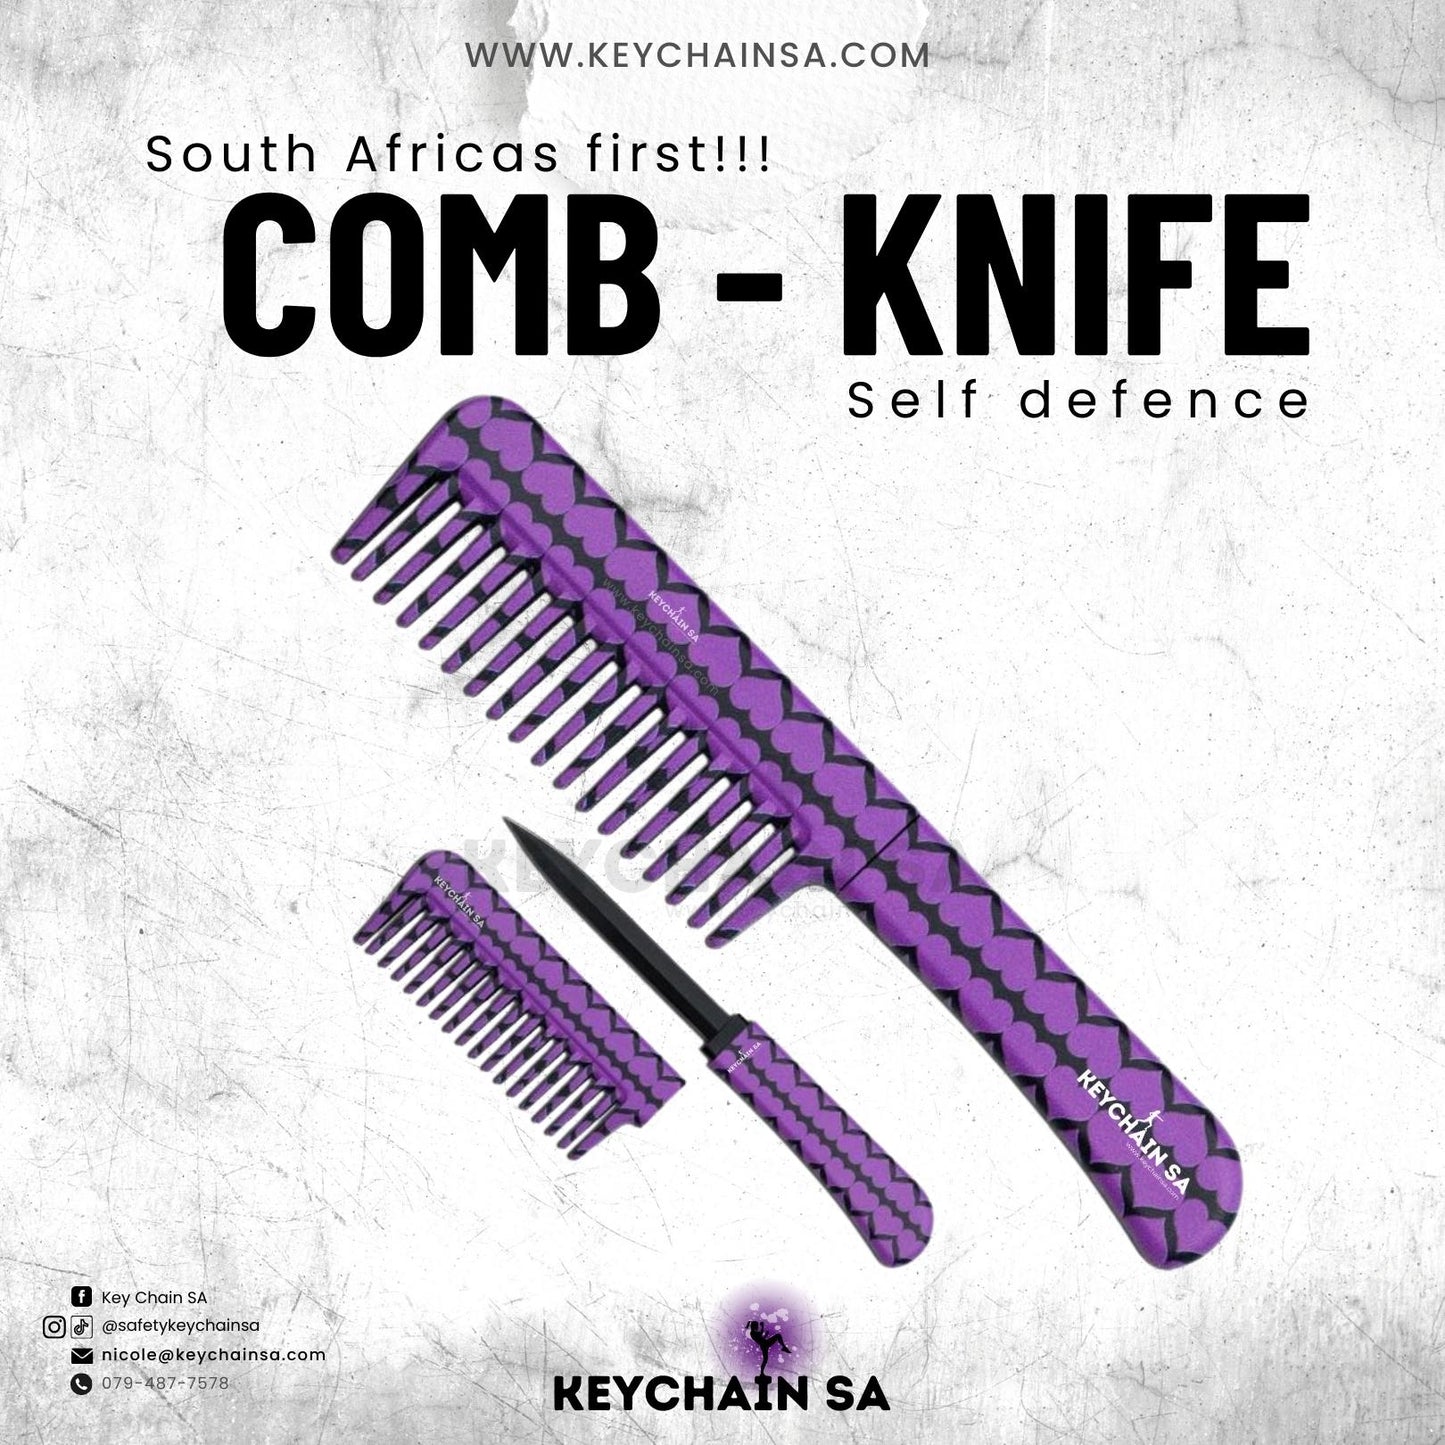 Comb Knife self defence - South Africa's 1st